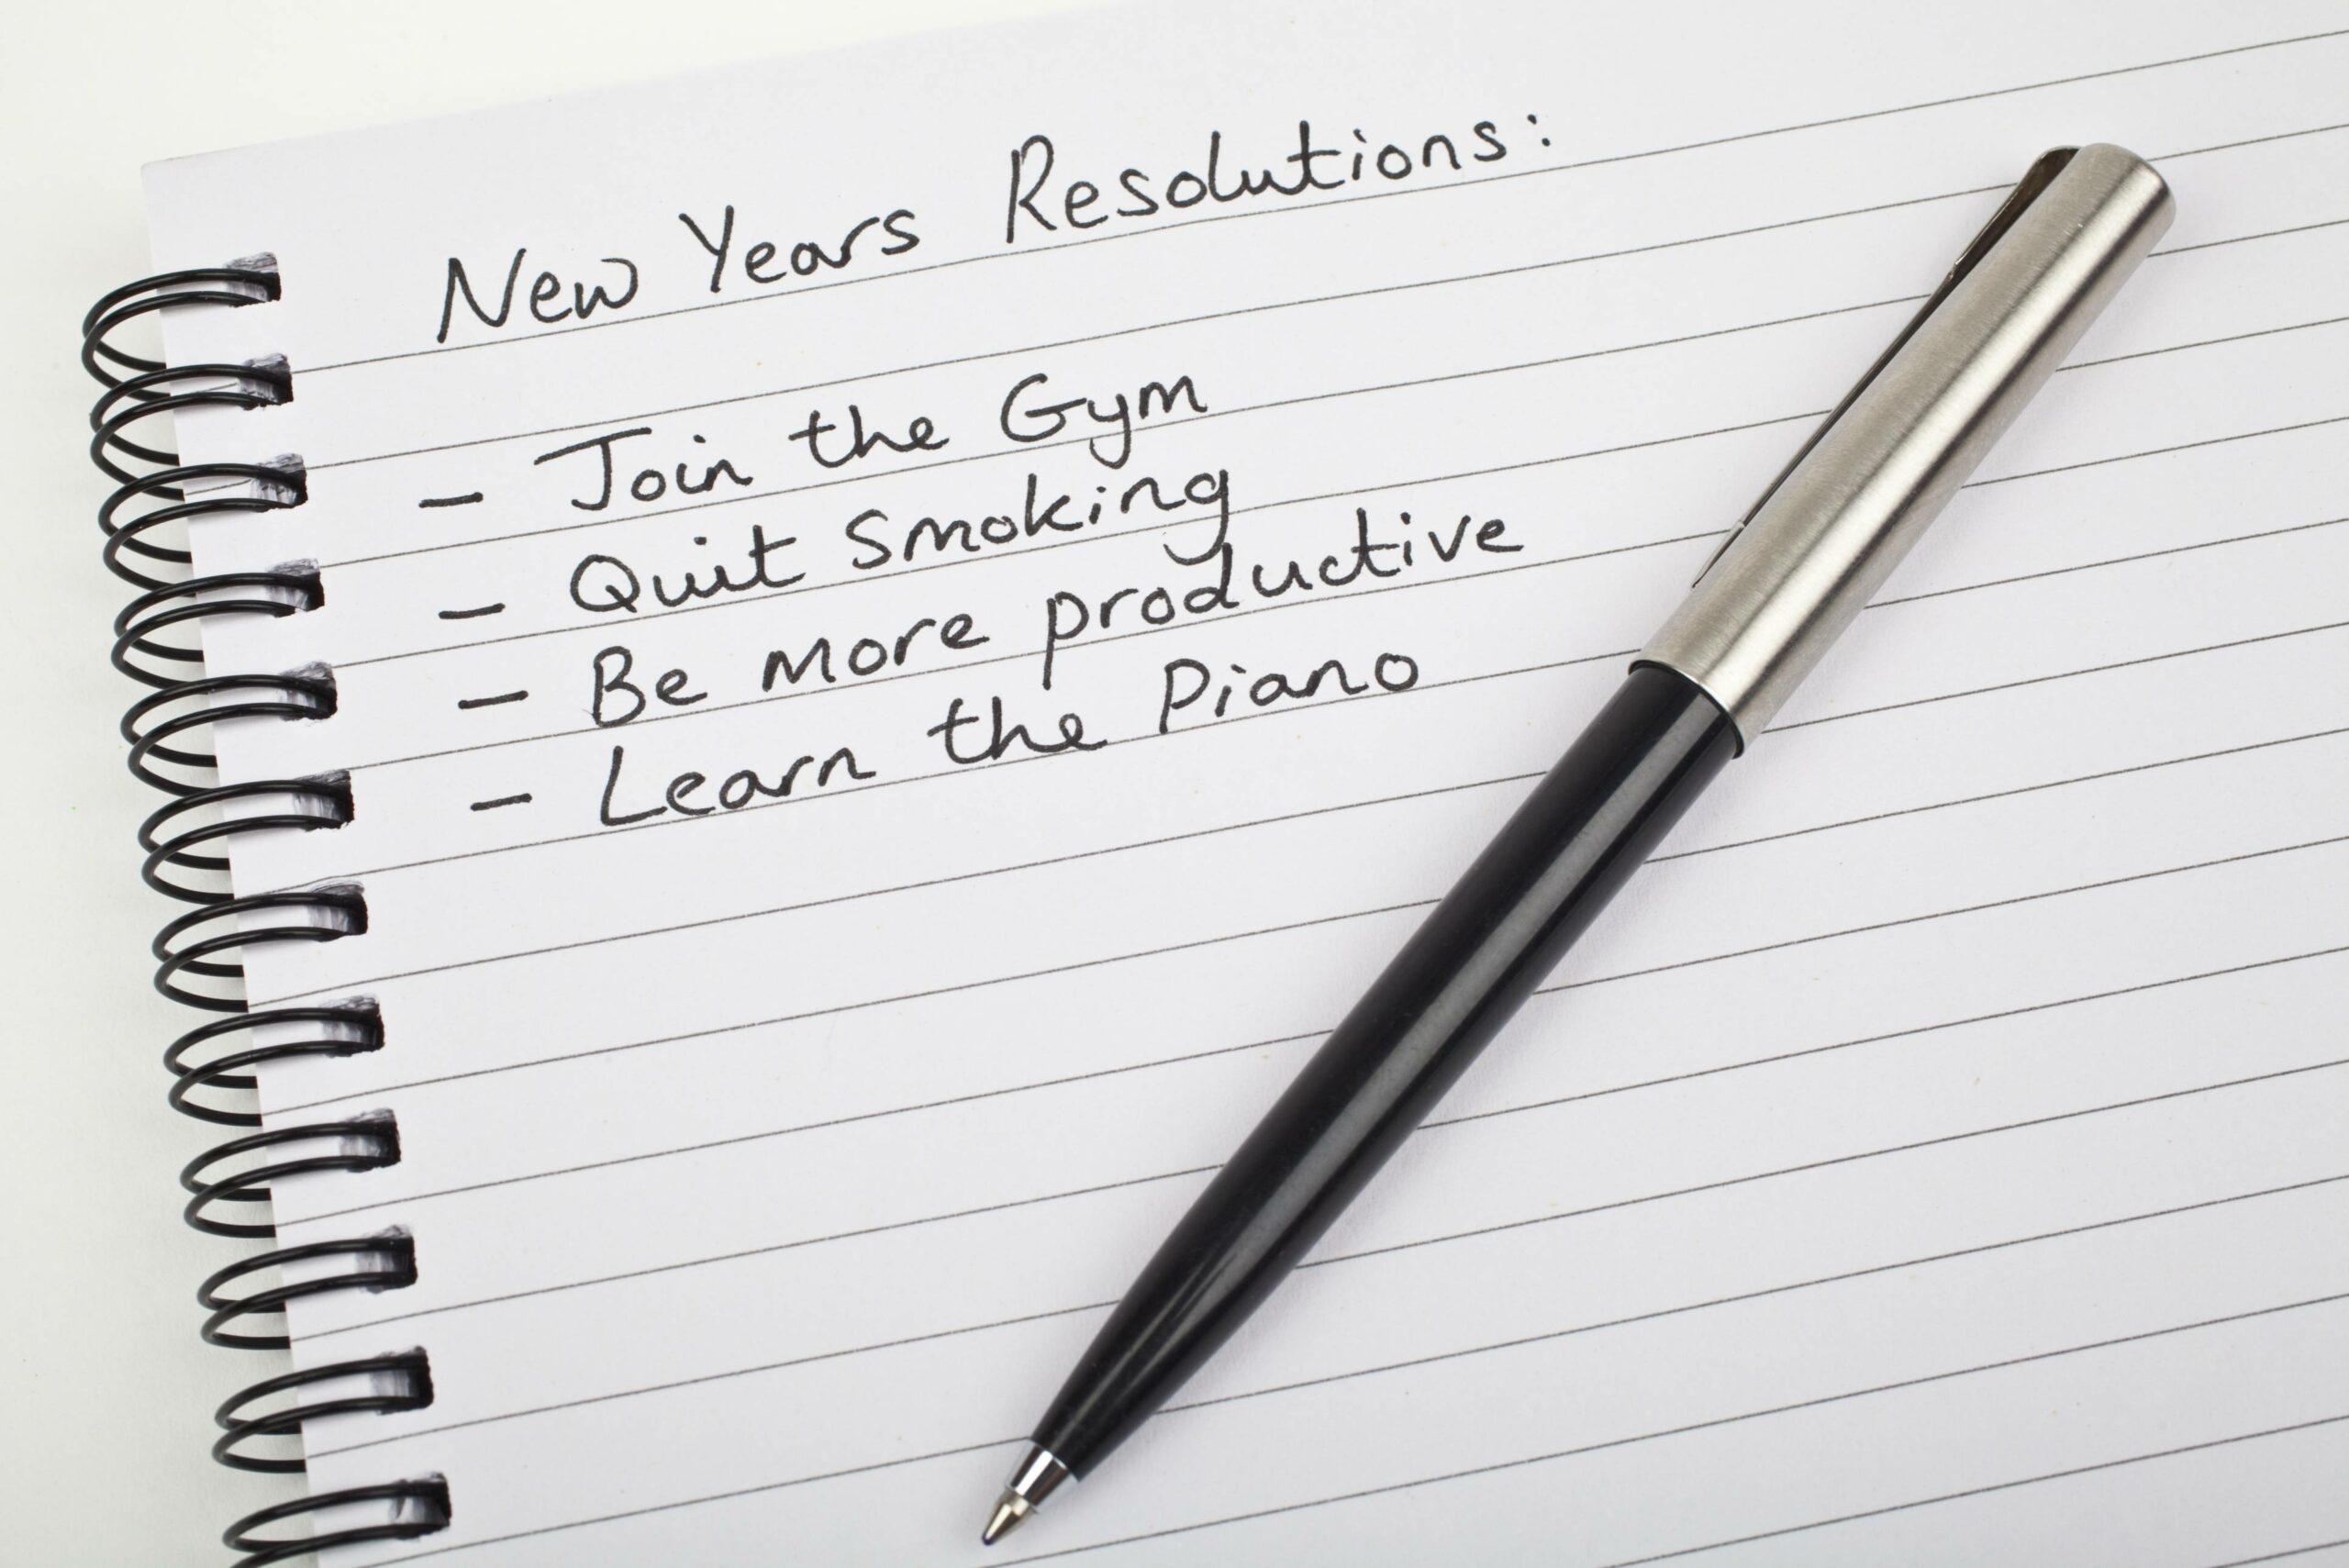 5 health resolutions to make in the new year by UofL Health Louisville KY